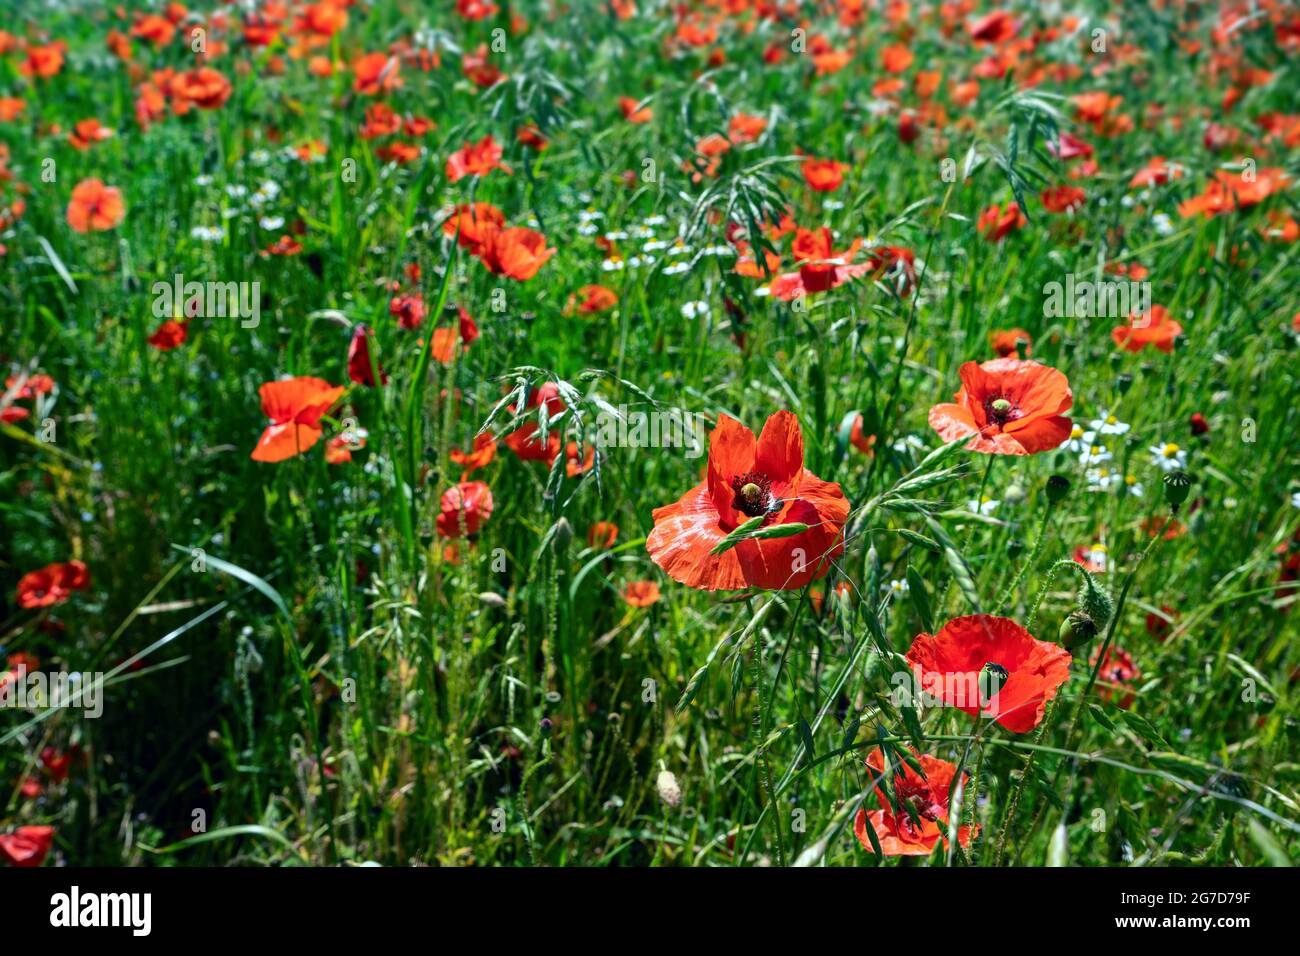 Red flowers of corn poppy (Papaver rhoeas) on an agriculture field, flowering plants as insect pasture, copy space, selected focus, narrow depth of fi Stock Photo